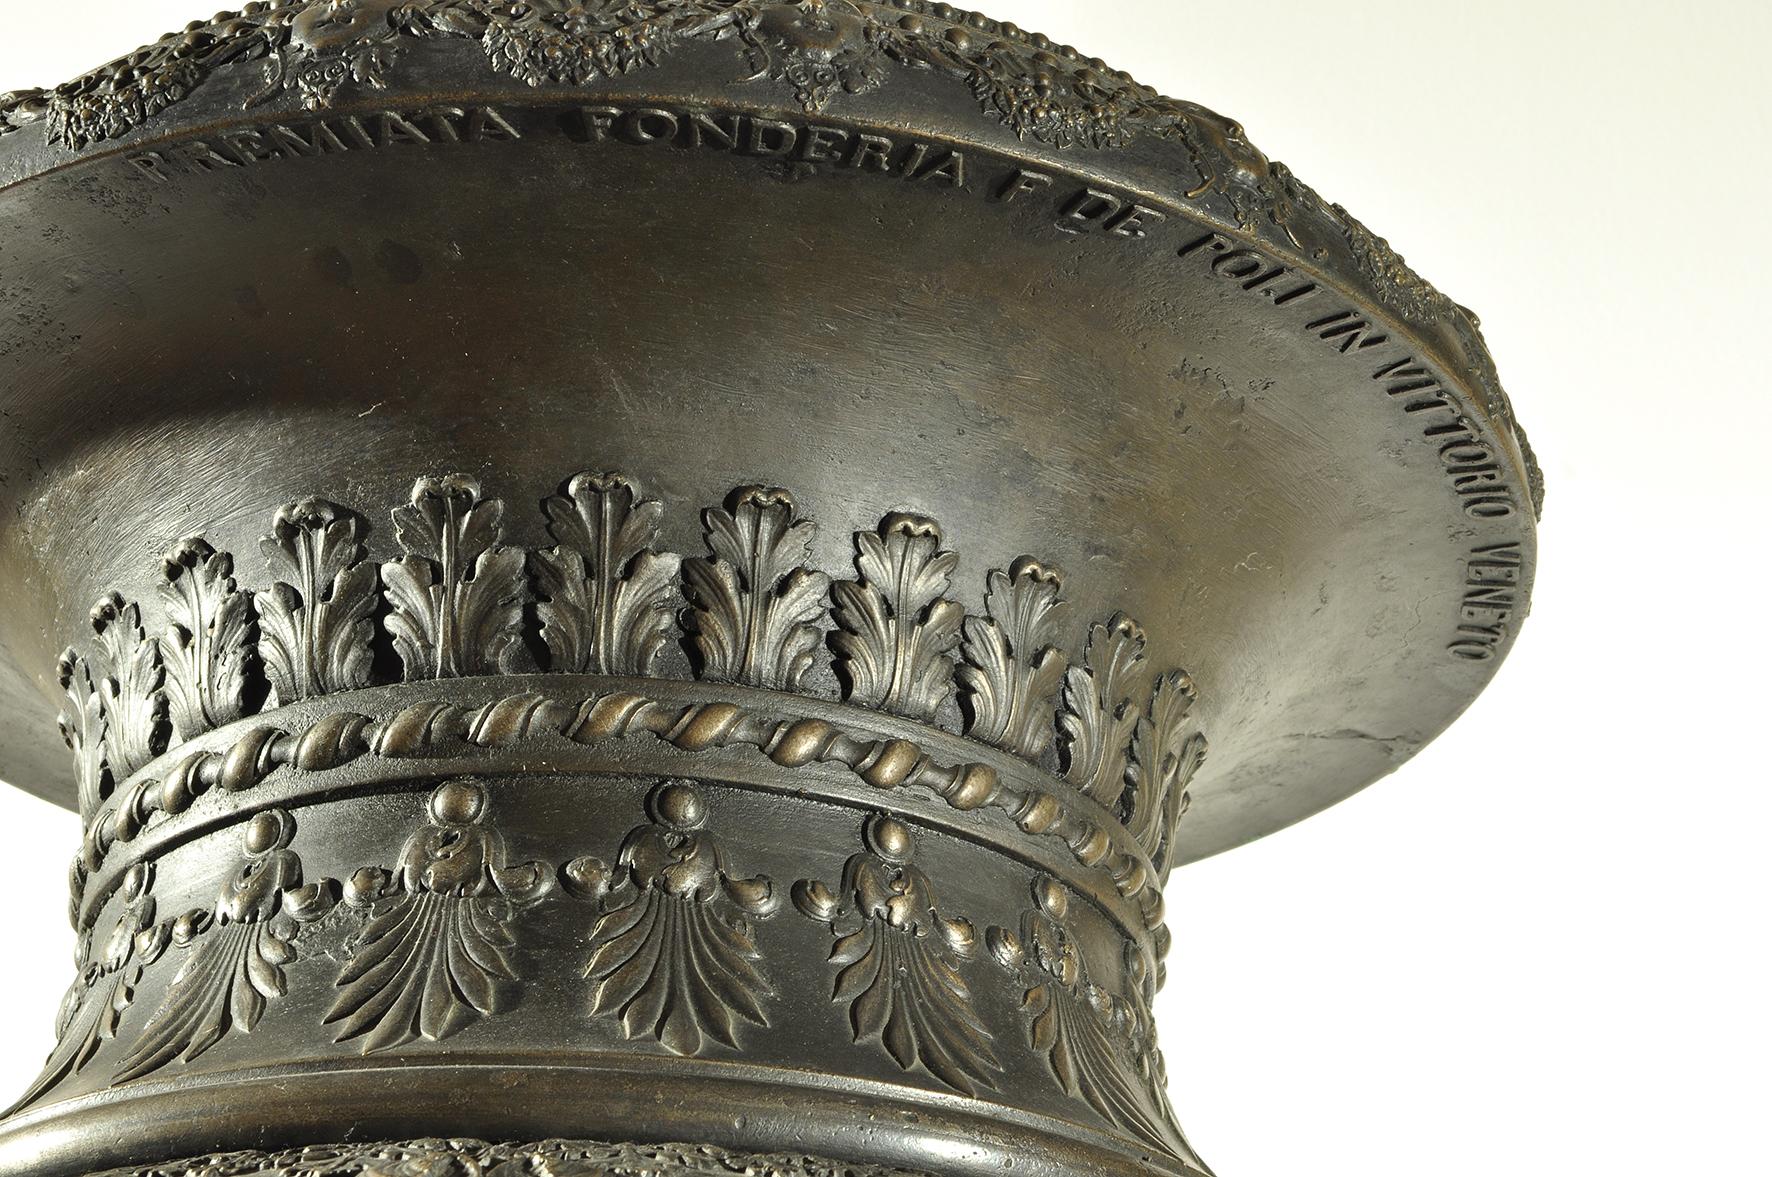 AWARDED FOUNDRY F. DE POLI IN VITTORIO VENETO
Pair of large decorative vases, 1927
Bronze, height 100 cm
One of the two dated 